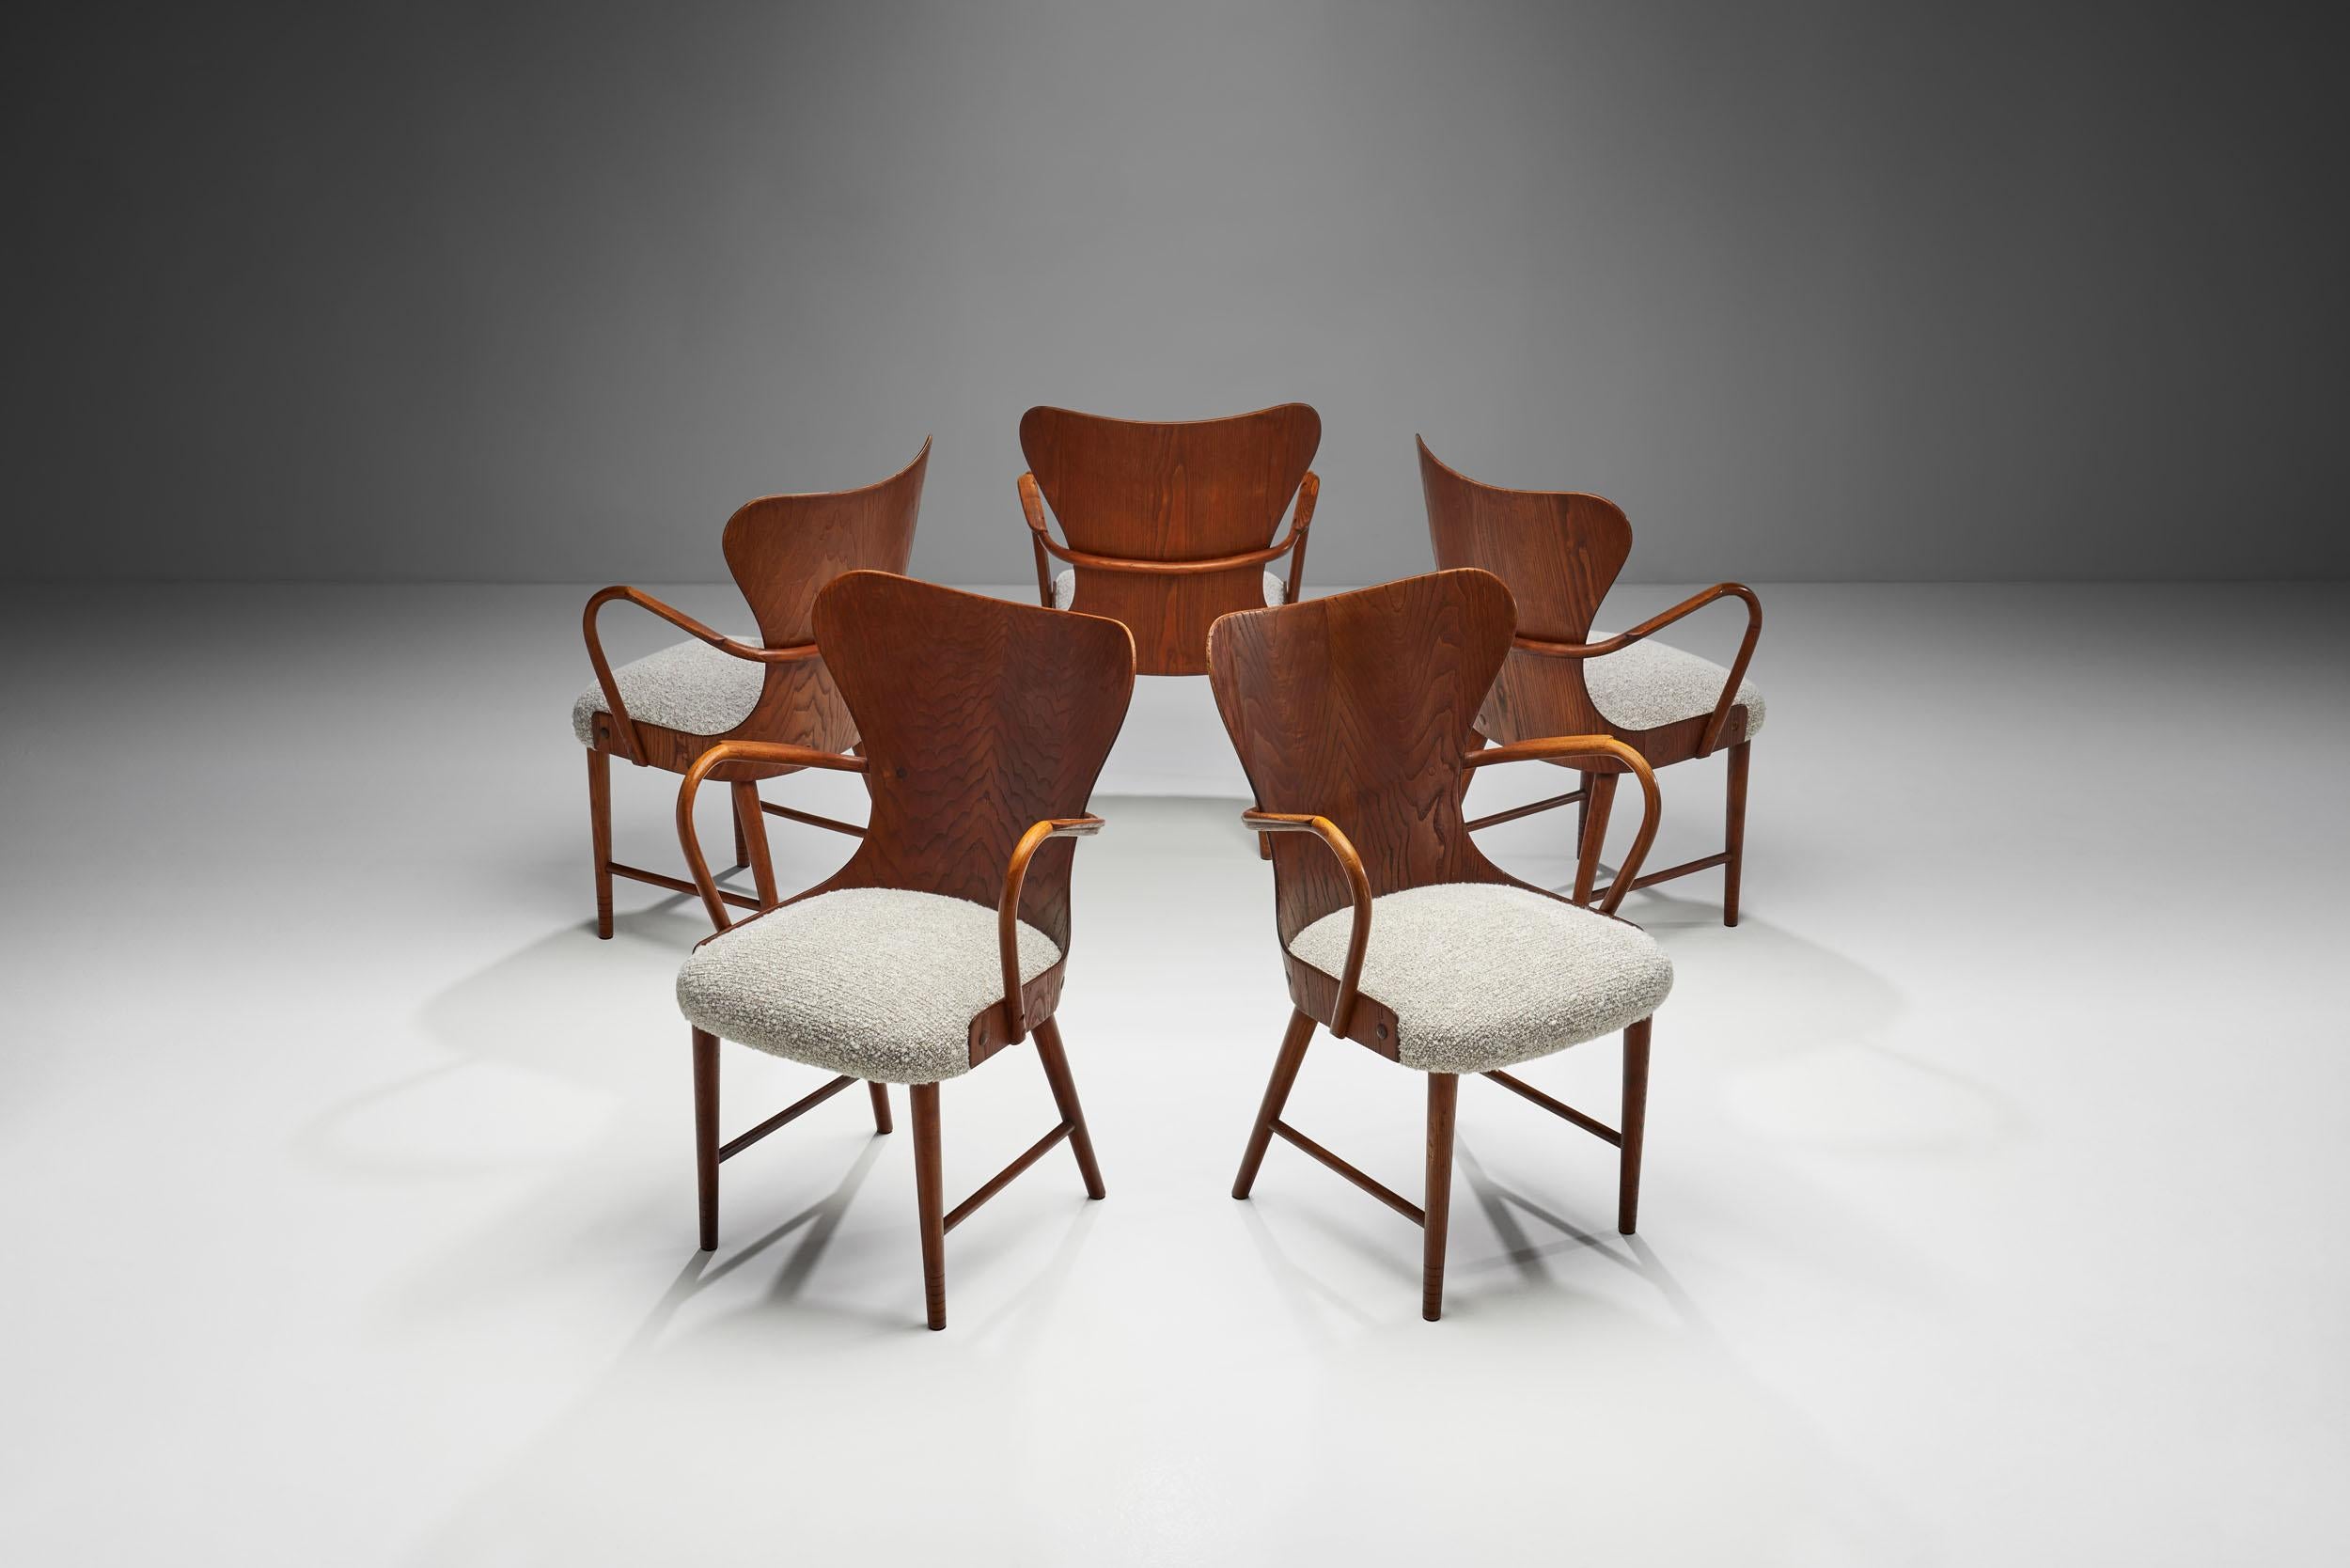 The chairs of this Søren Hansen set are the Danish designer’s most well-known models. This model also represents the success of Fritz Hansen’s experiments with new materials and new manufacturing methods.

These stained oak chairs stand out for